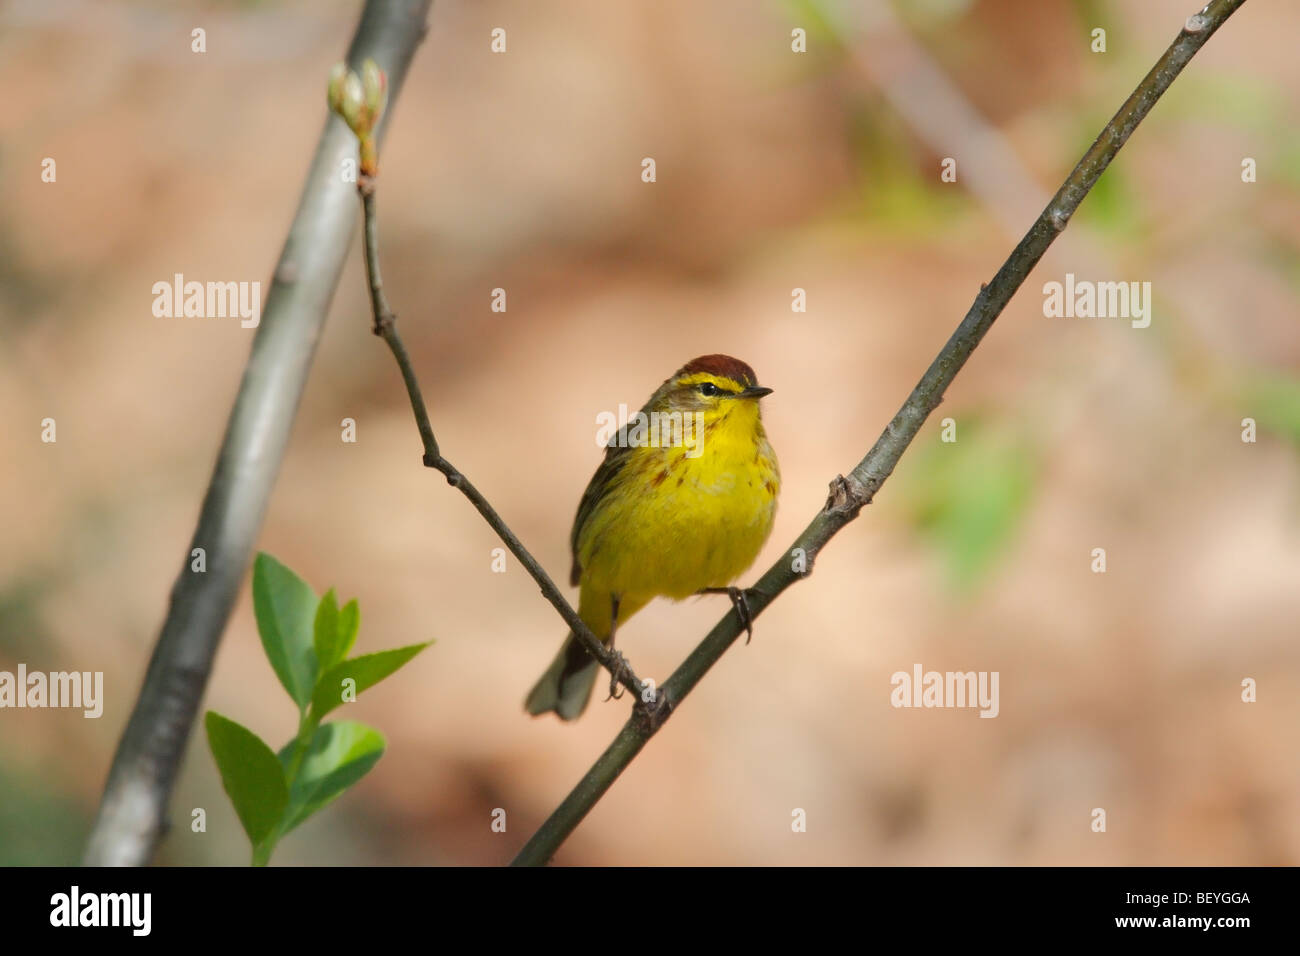 Palm Warbler (Dendroica palmarum palmarum), 'Yellow' subspecies, early Spring migrant sitting on branch. Stock Photo